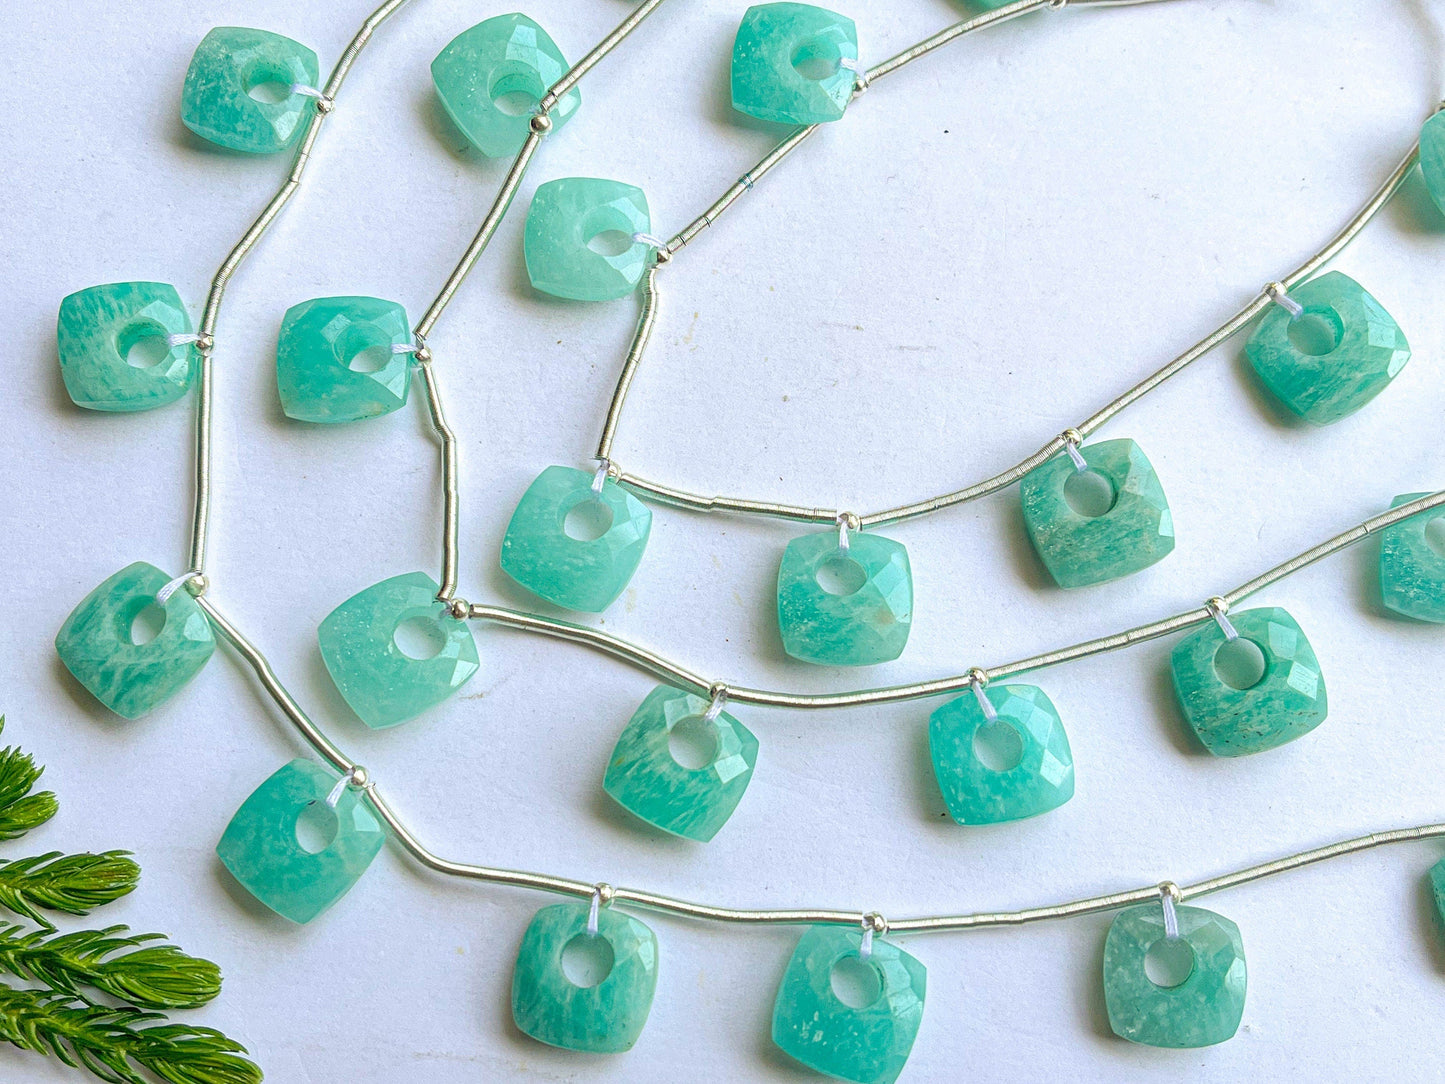 Amazonite Cushion Hoop Shape Faceted Briolette Beads, Natural Amazonite Gemstone, Amazonite cushion beads, 12x12mm, 10 Pieces Beadsforyourjewelry